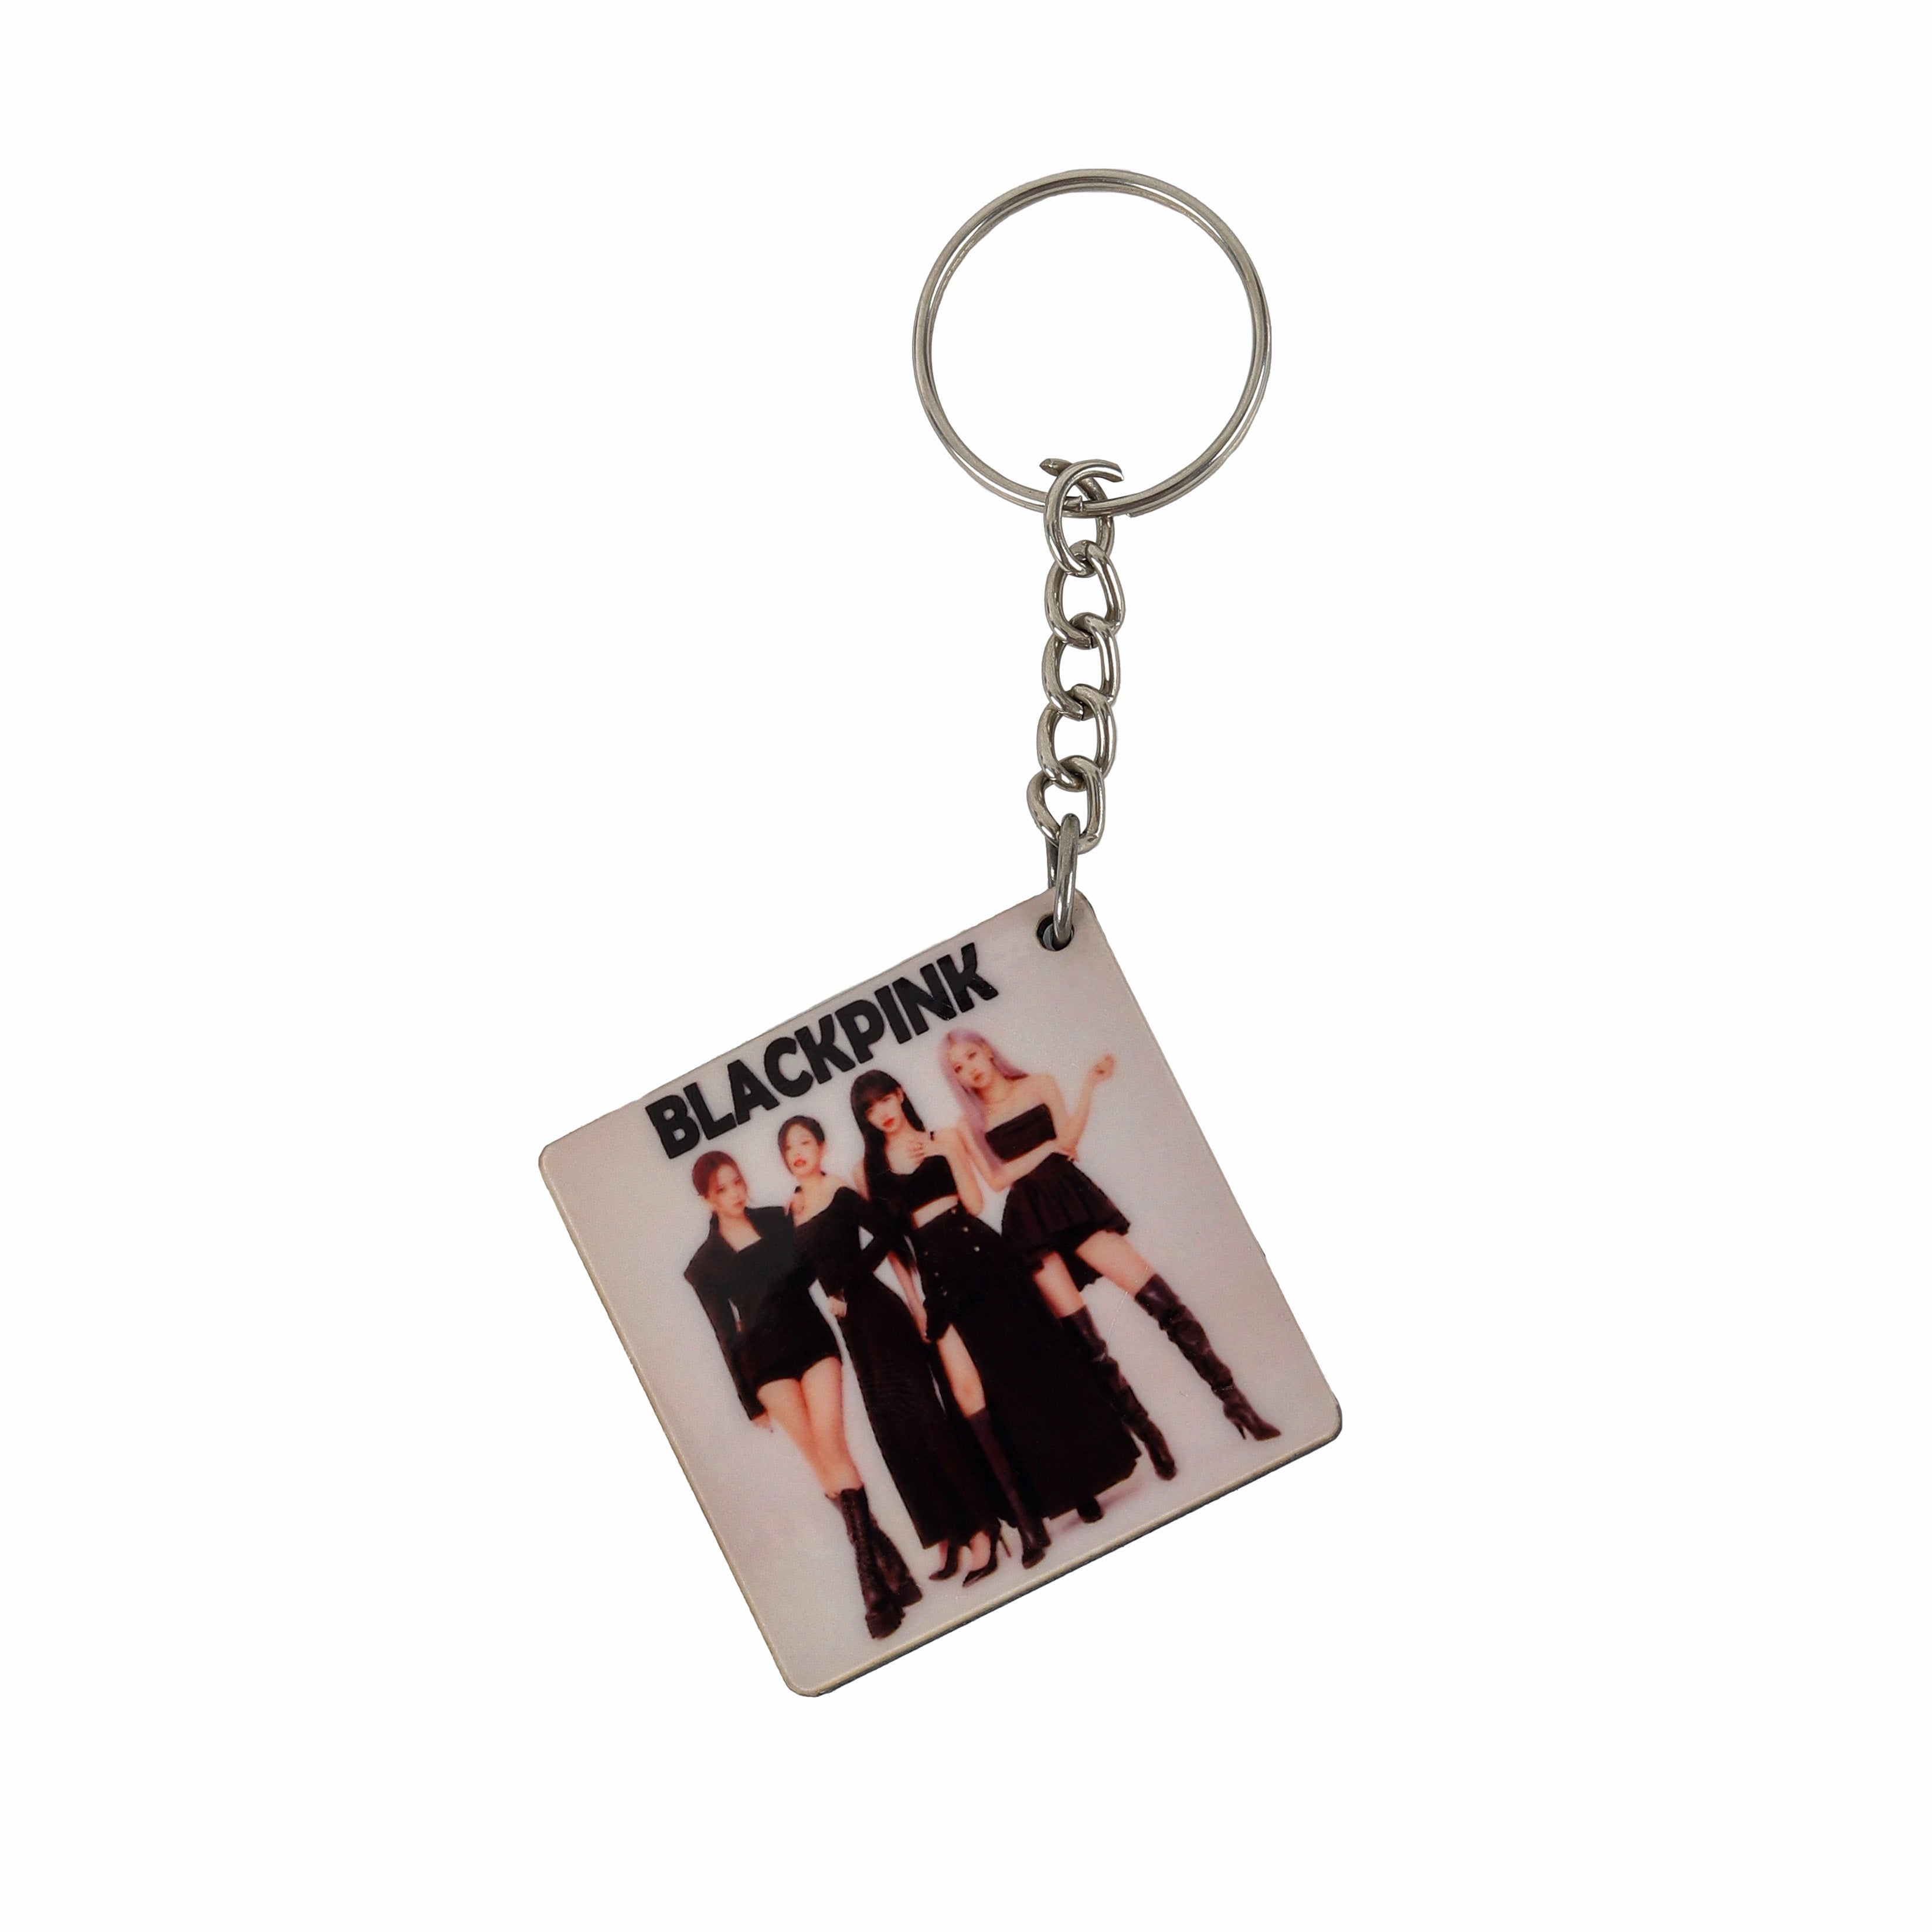 Square Personalised Keychain